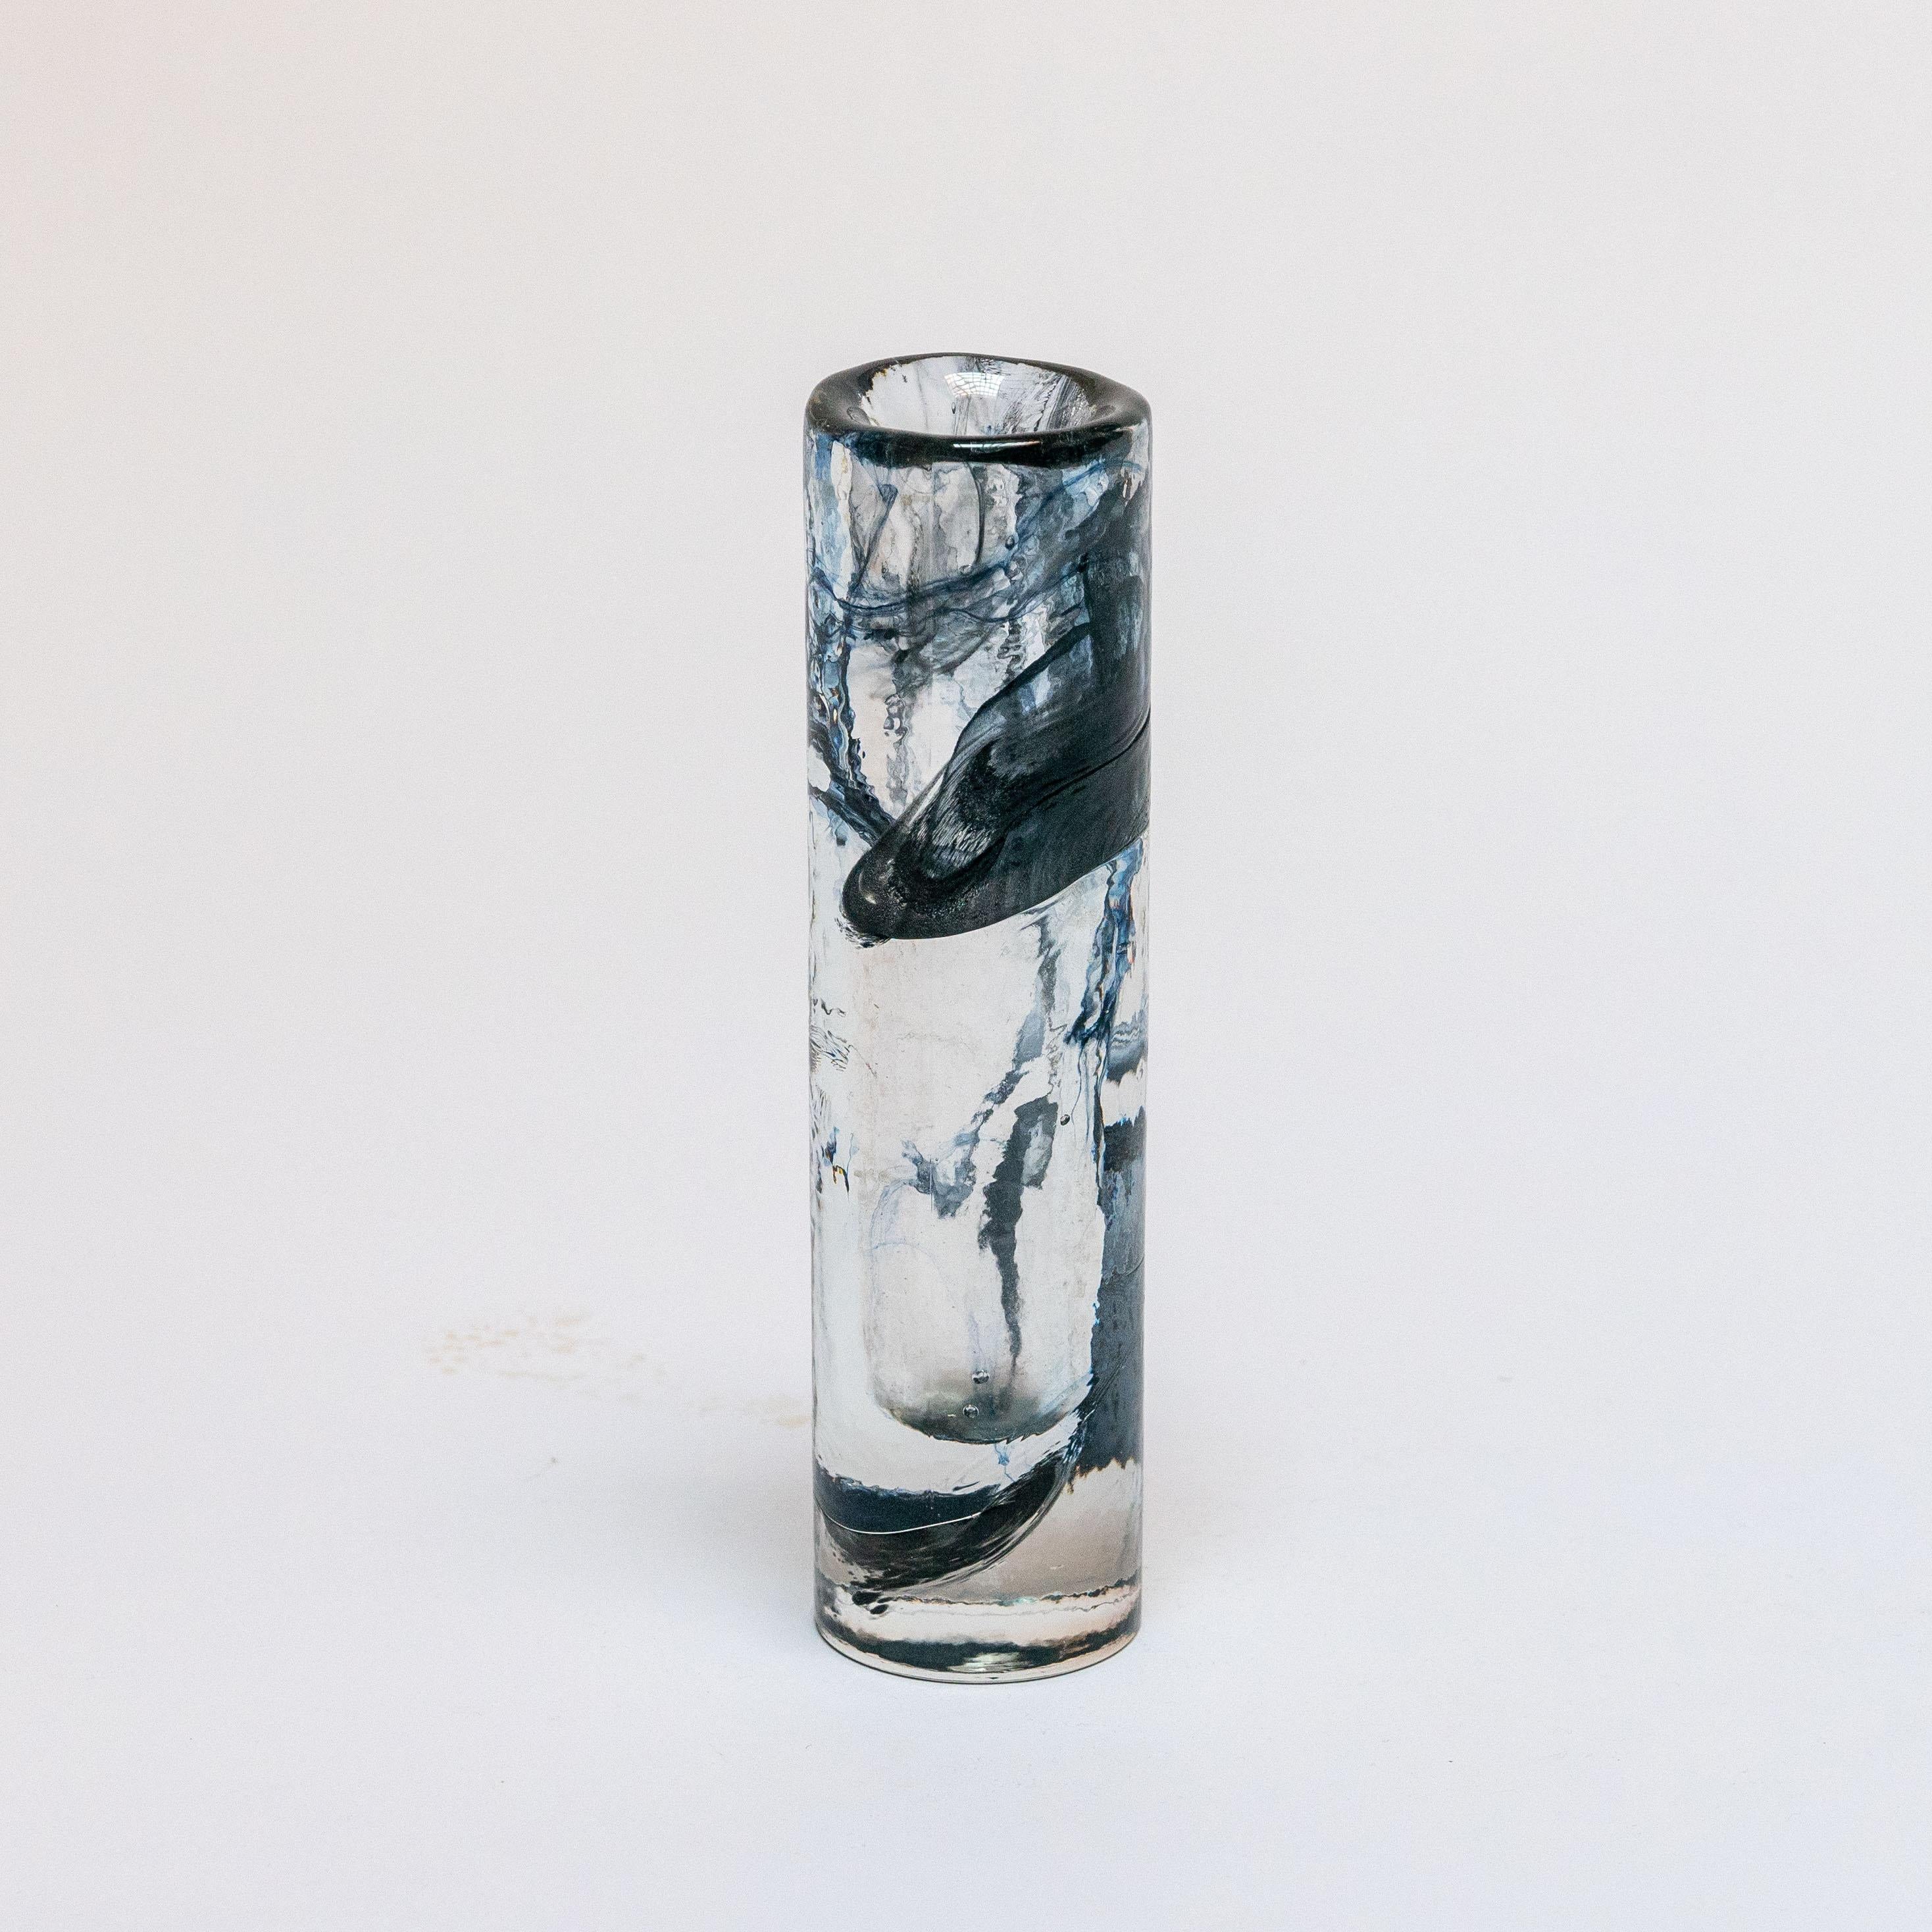 Have you ever put a drop of ink into a glass of water? Chances are, if you did, the result looked pretty much like this vintage Murano glass vase. Made of clear thick 